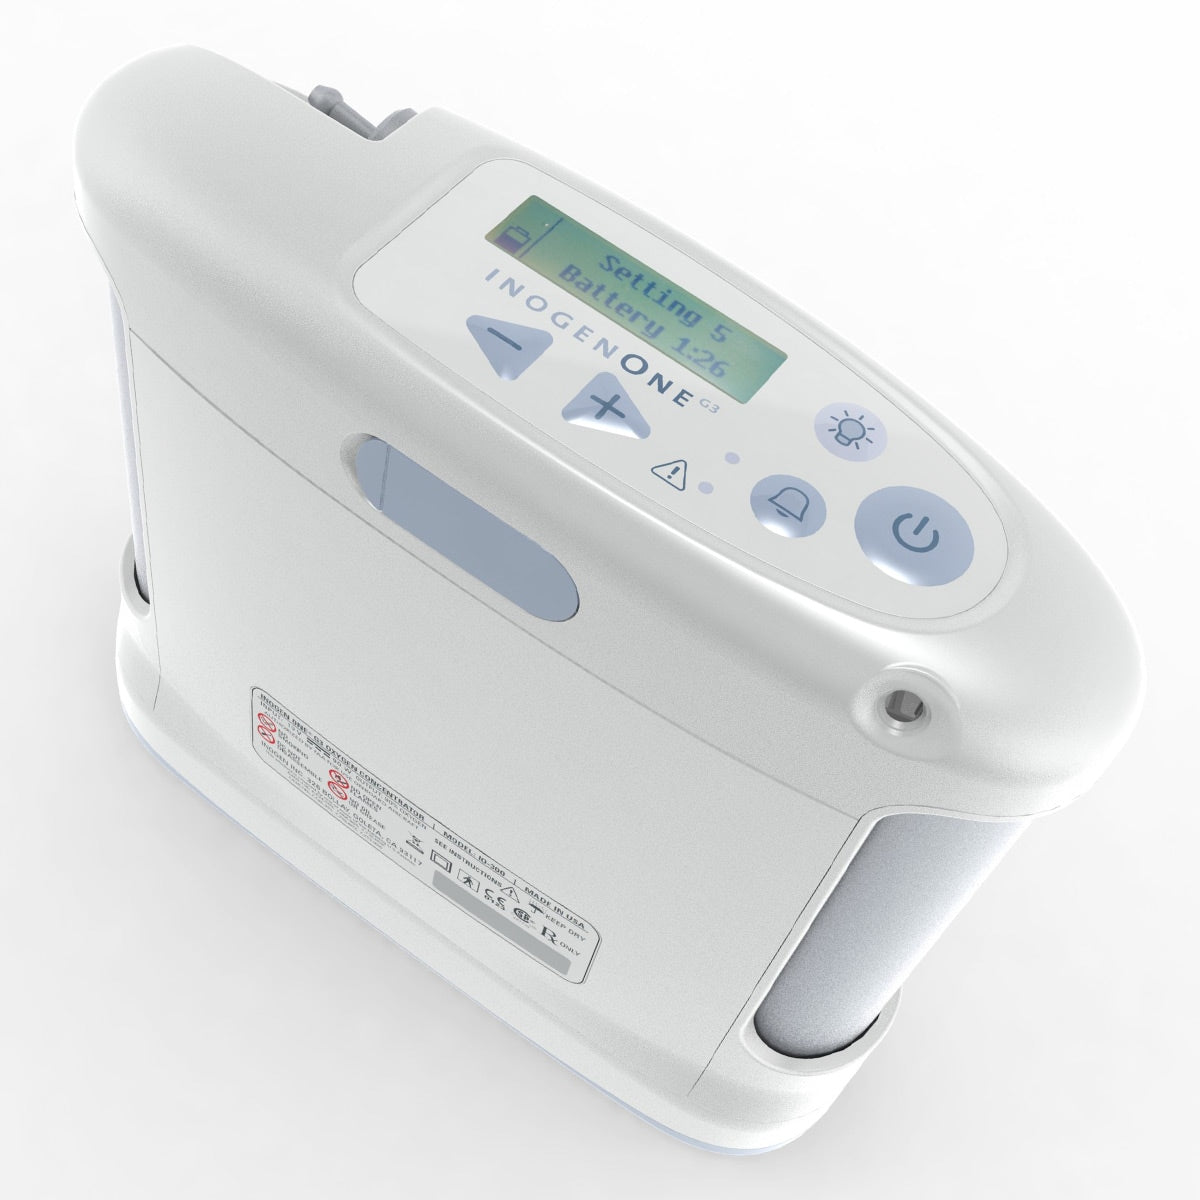 Top View Of Inogen One G3 Portable Oxygen Concentrator.